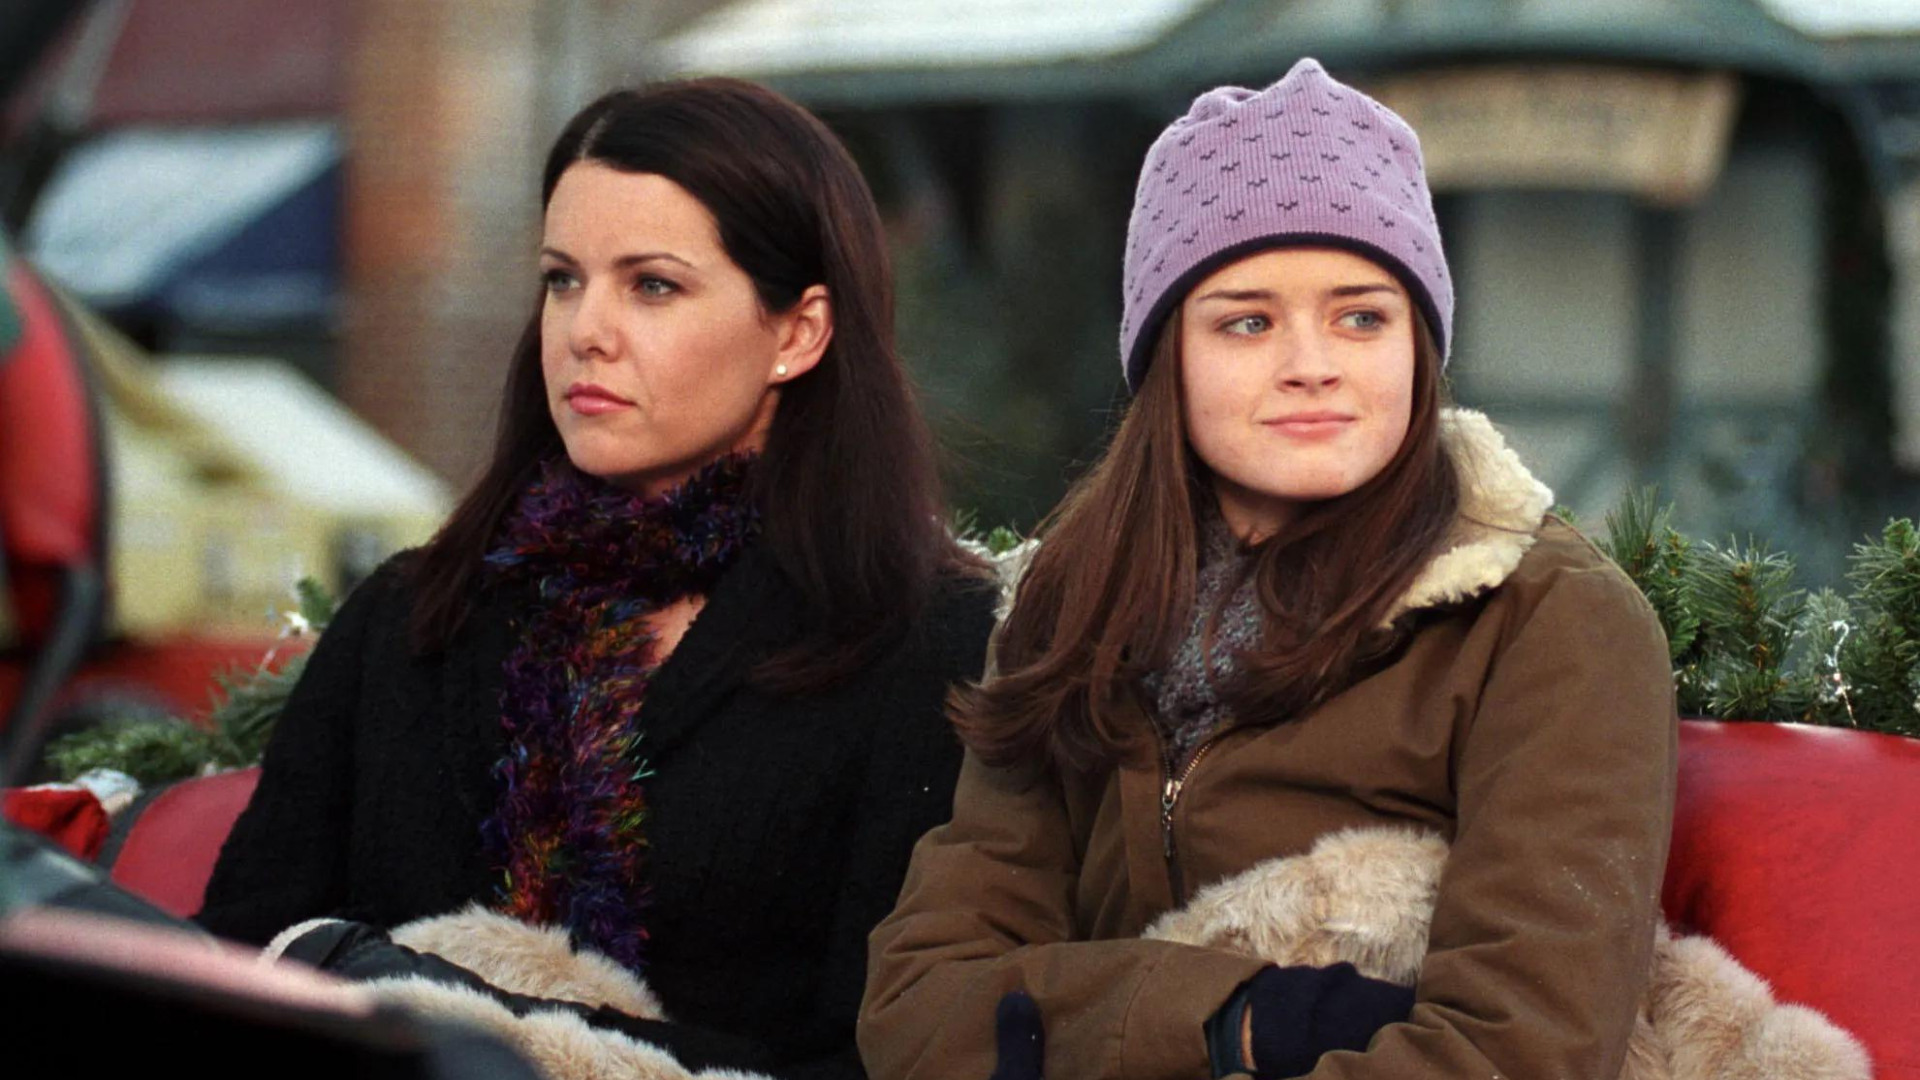 Gilmore Girls Quotes - Who Said These 30 Gilmore Girls Quotes Quiz